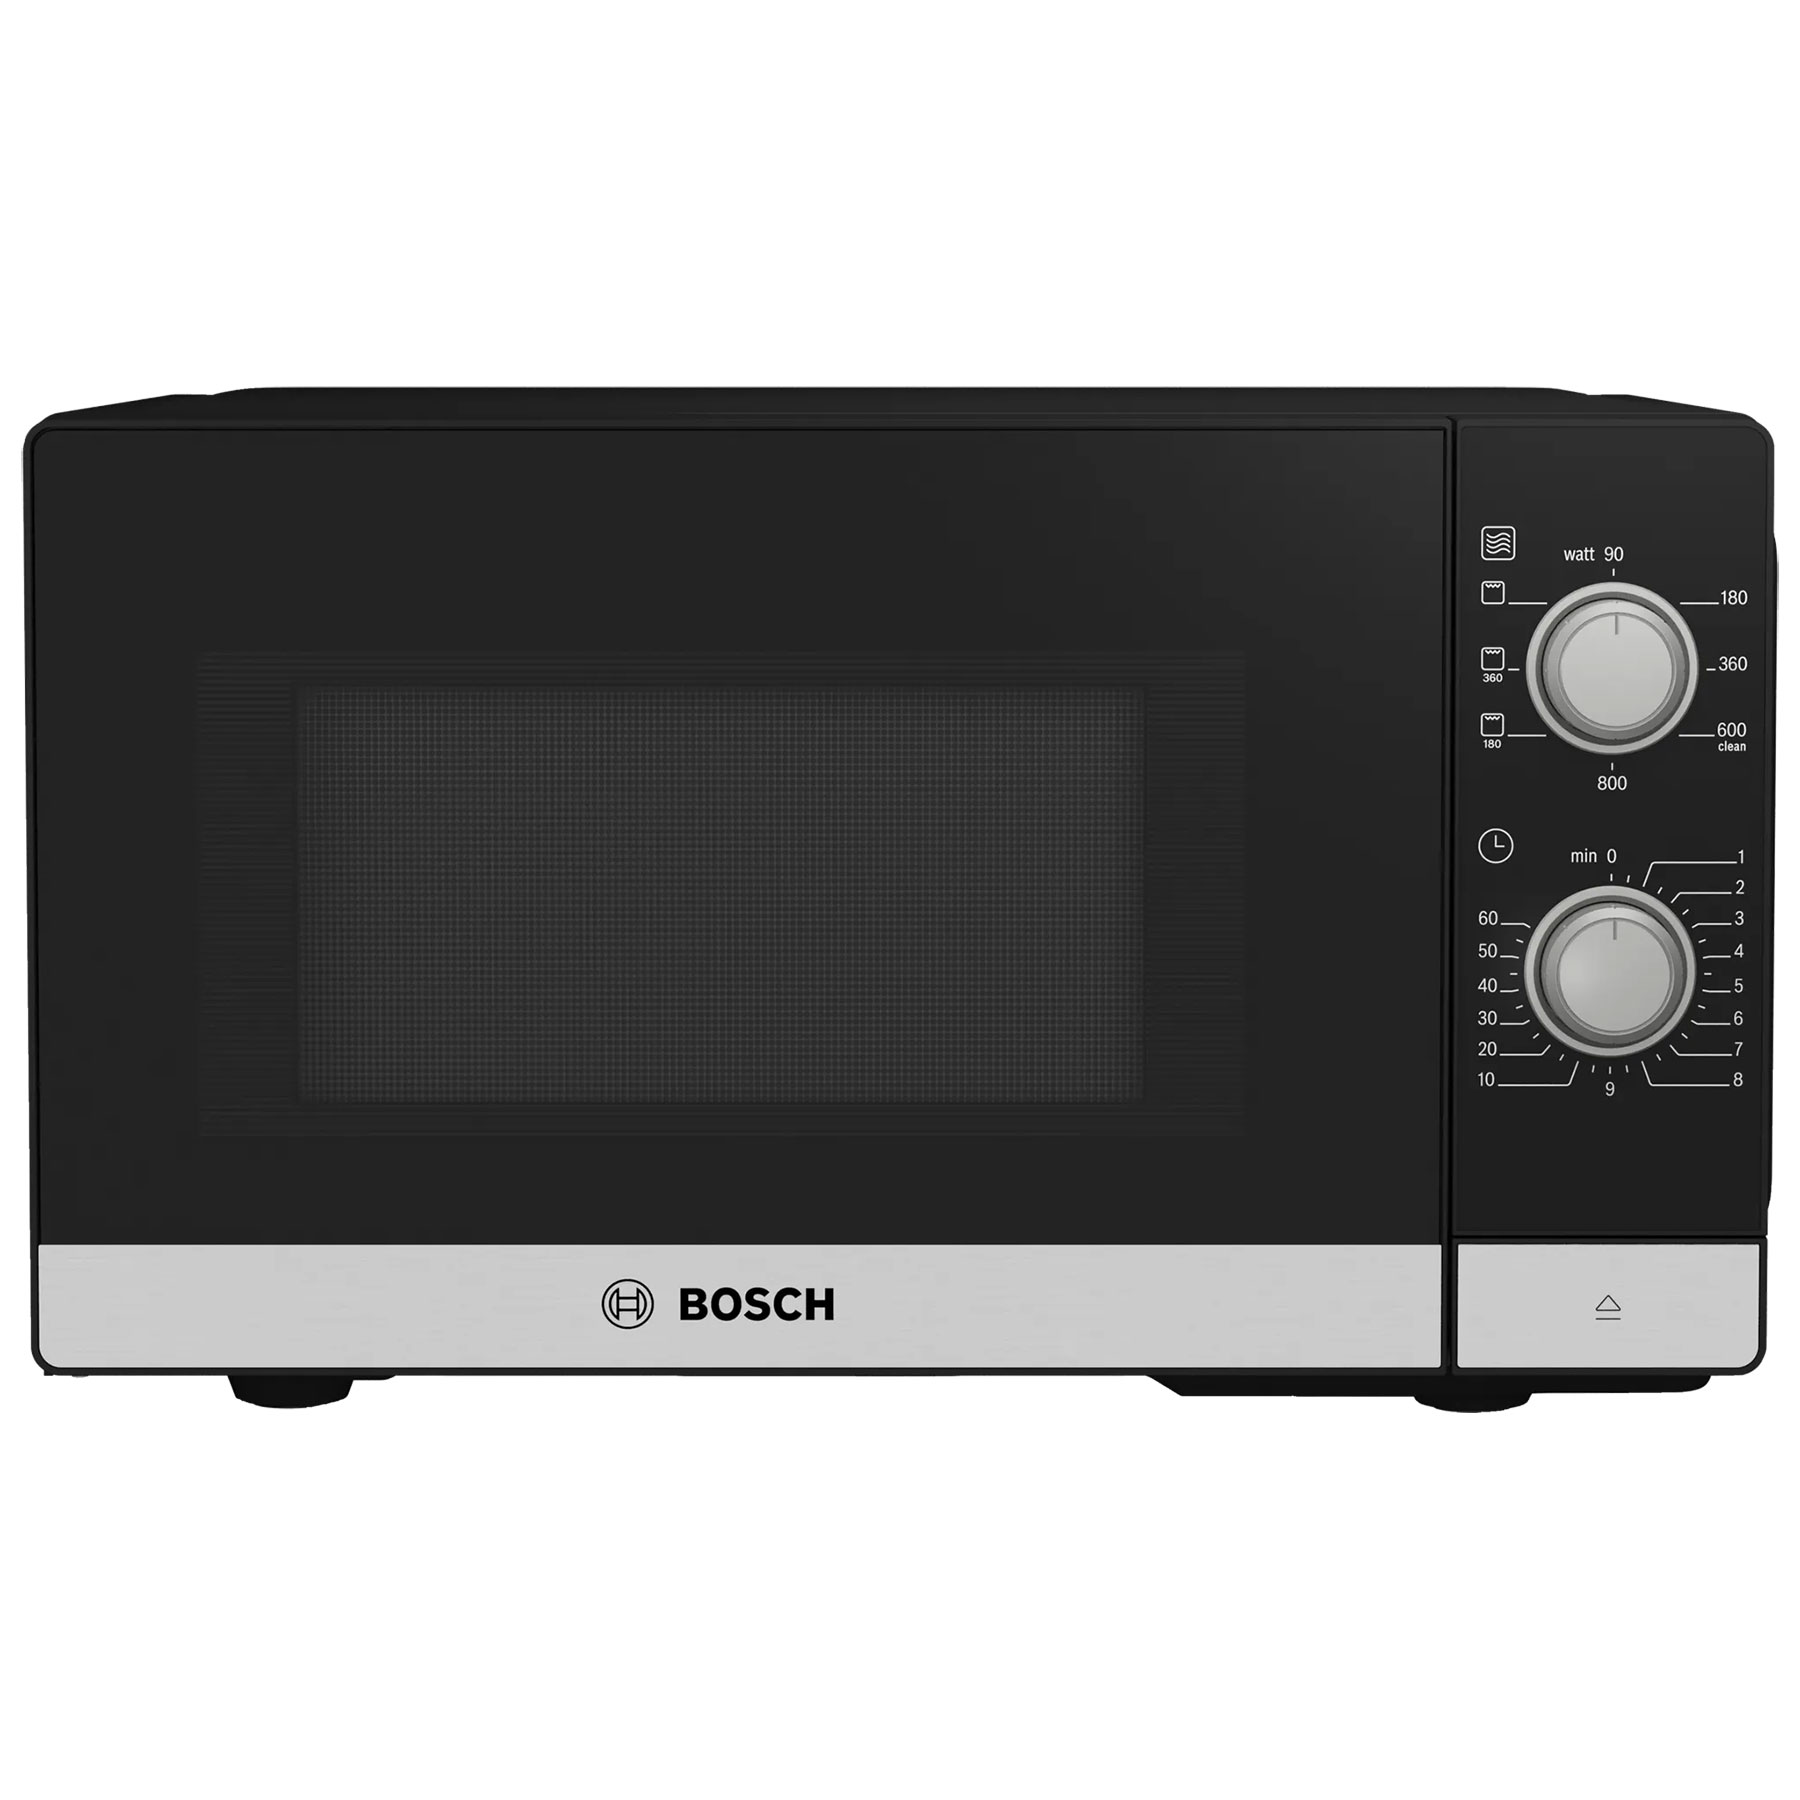 Bosch FEL020MS2B Series 2 Solo Microwave Oven With Grill Black 20L 800